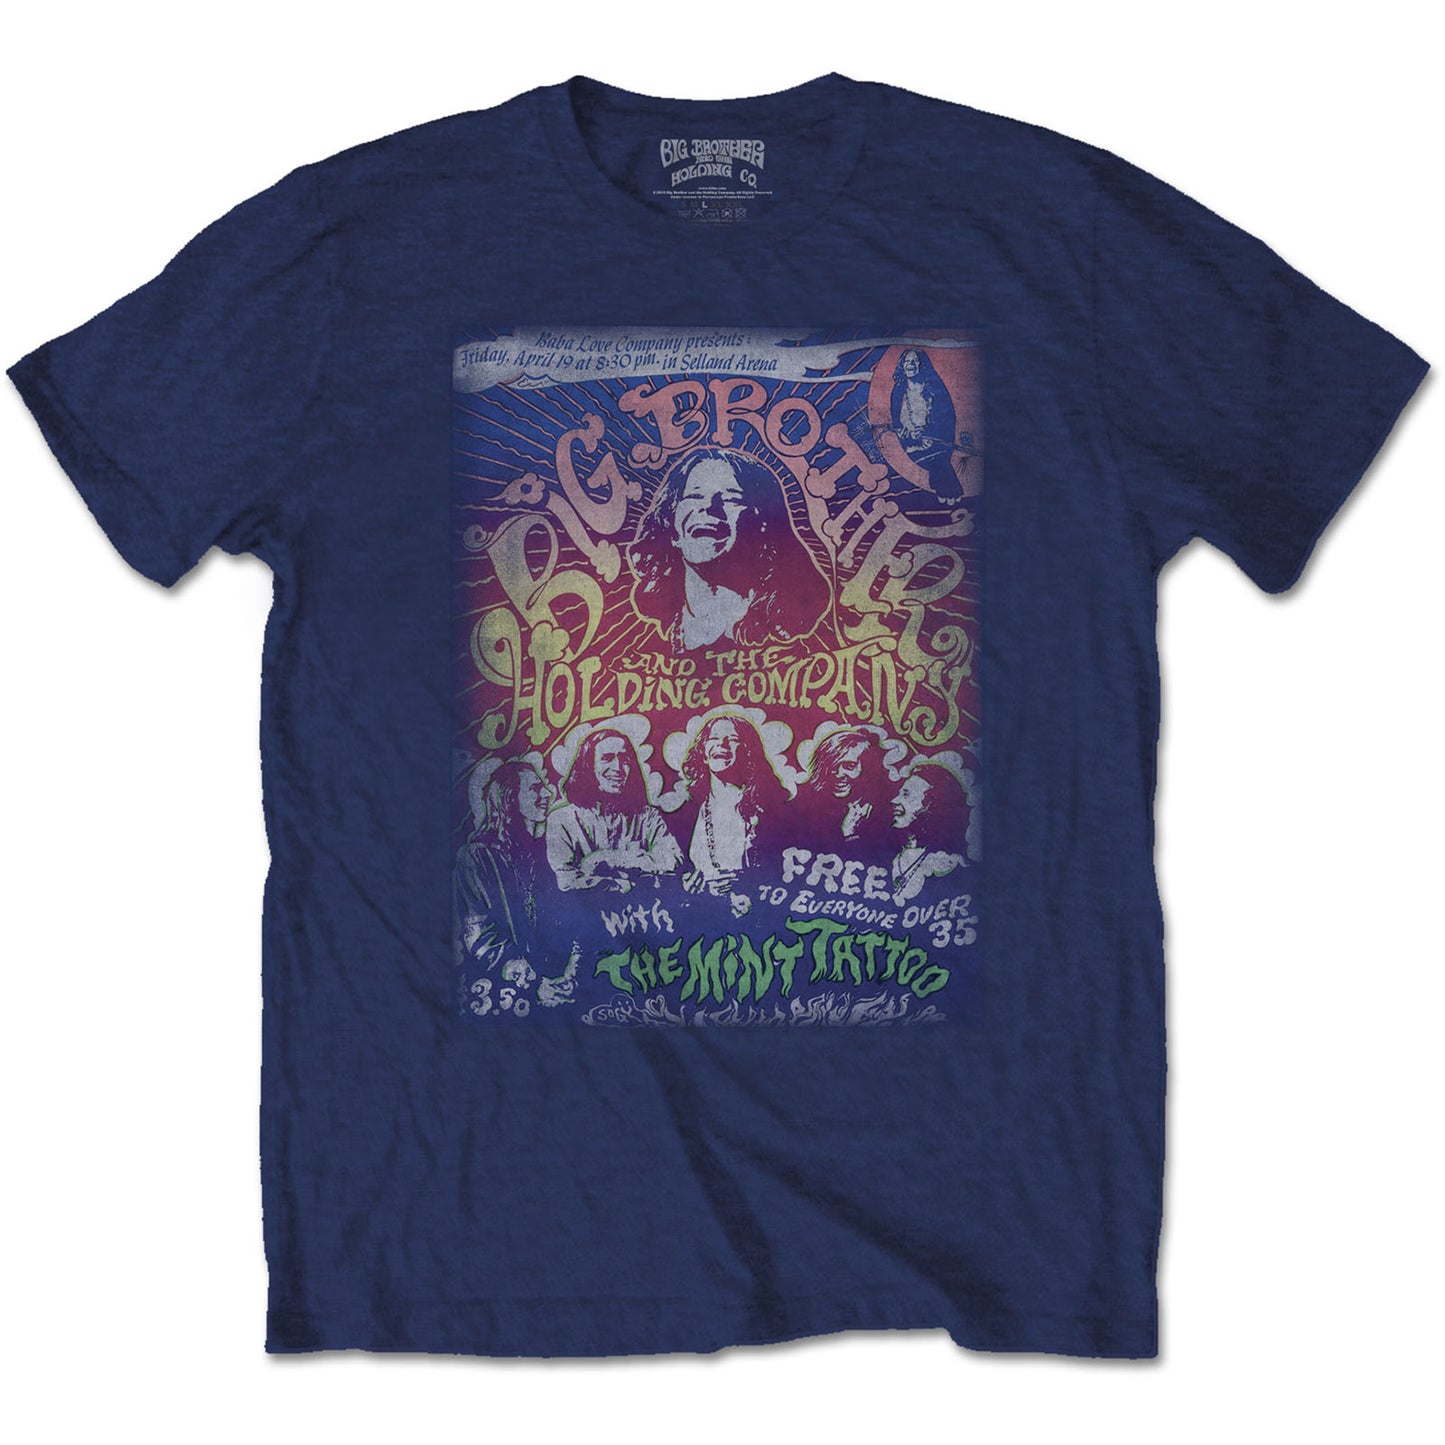 Big Brother & The Holding Company T-Shirt: Selland Arena